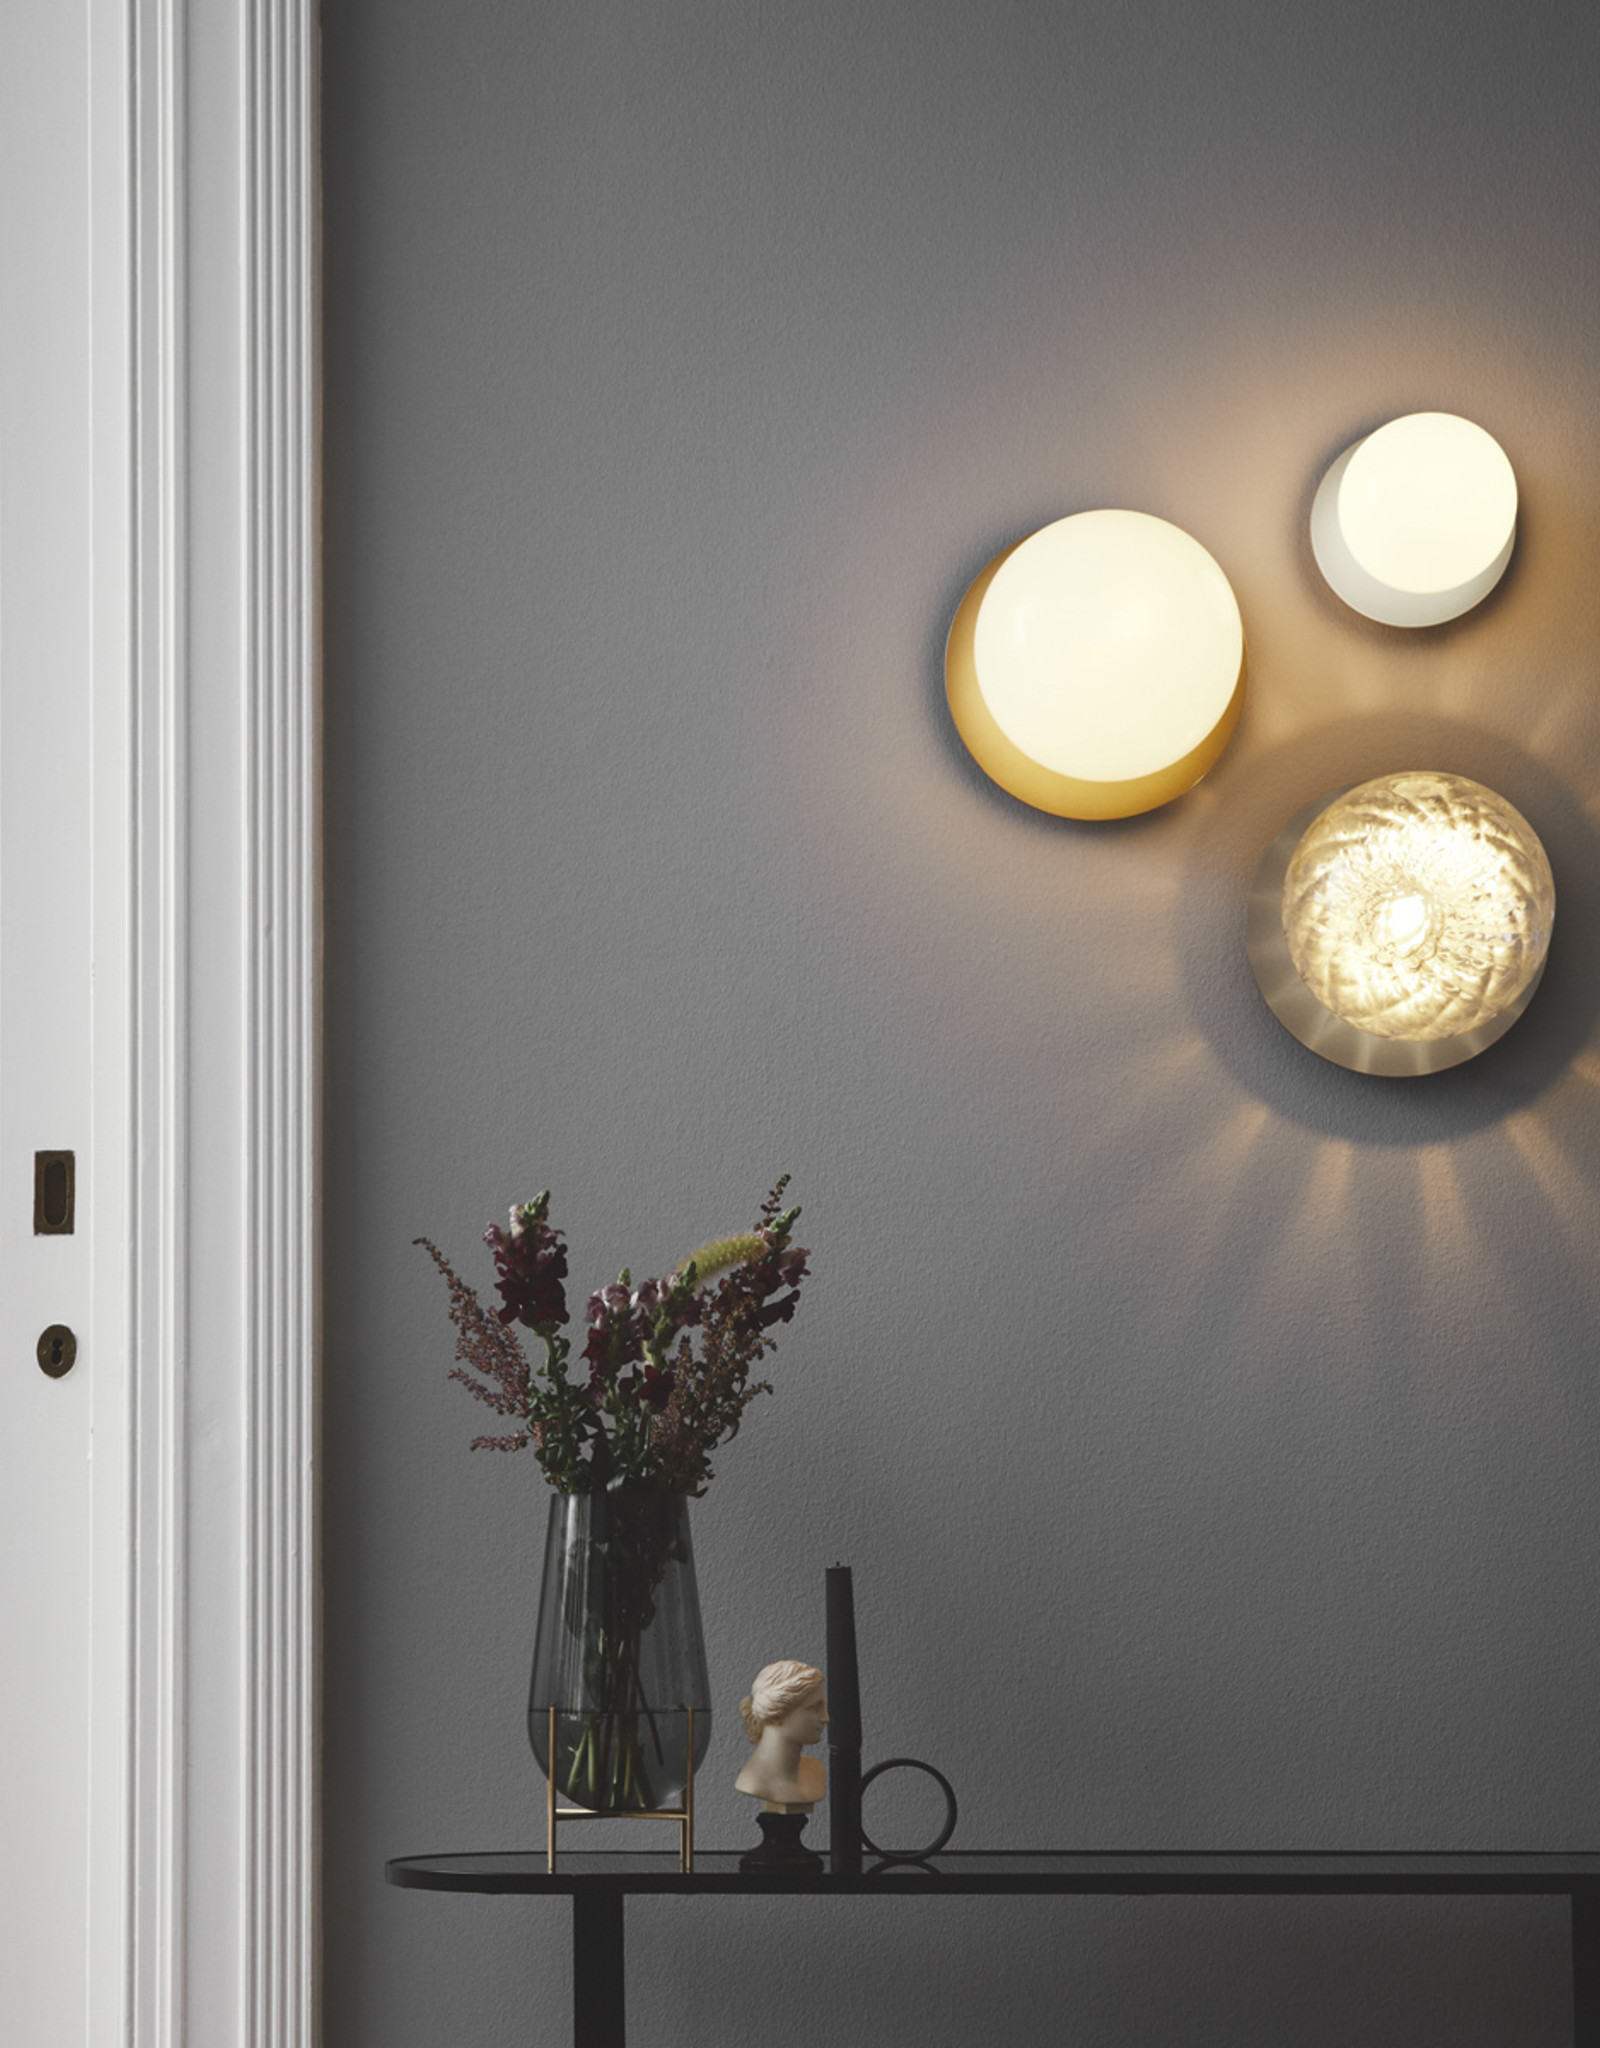 Nuura Liila 1 wall light by Sofie Refer | L | Nordic gold/opal white